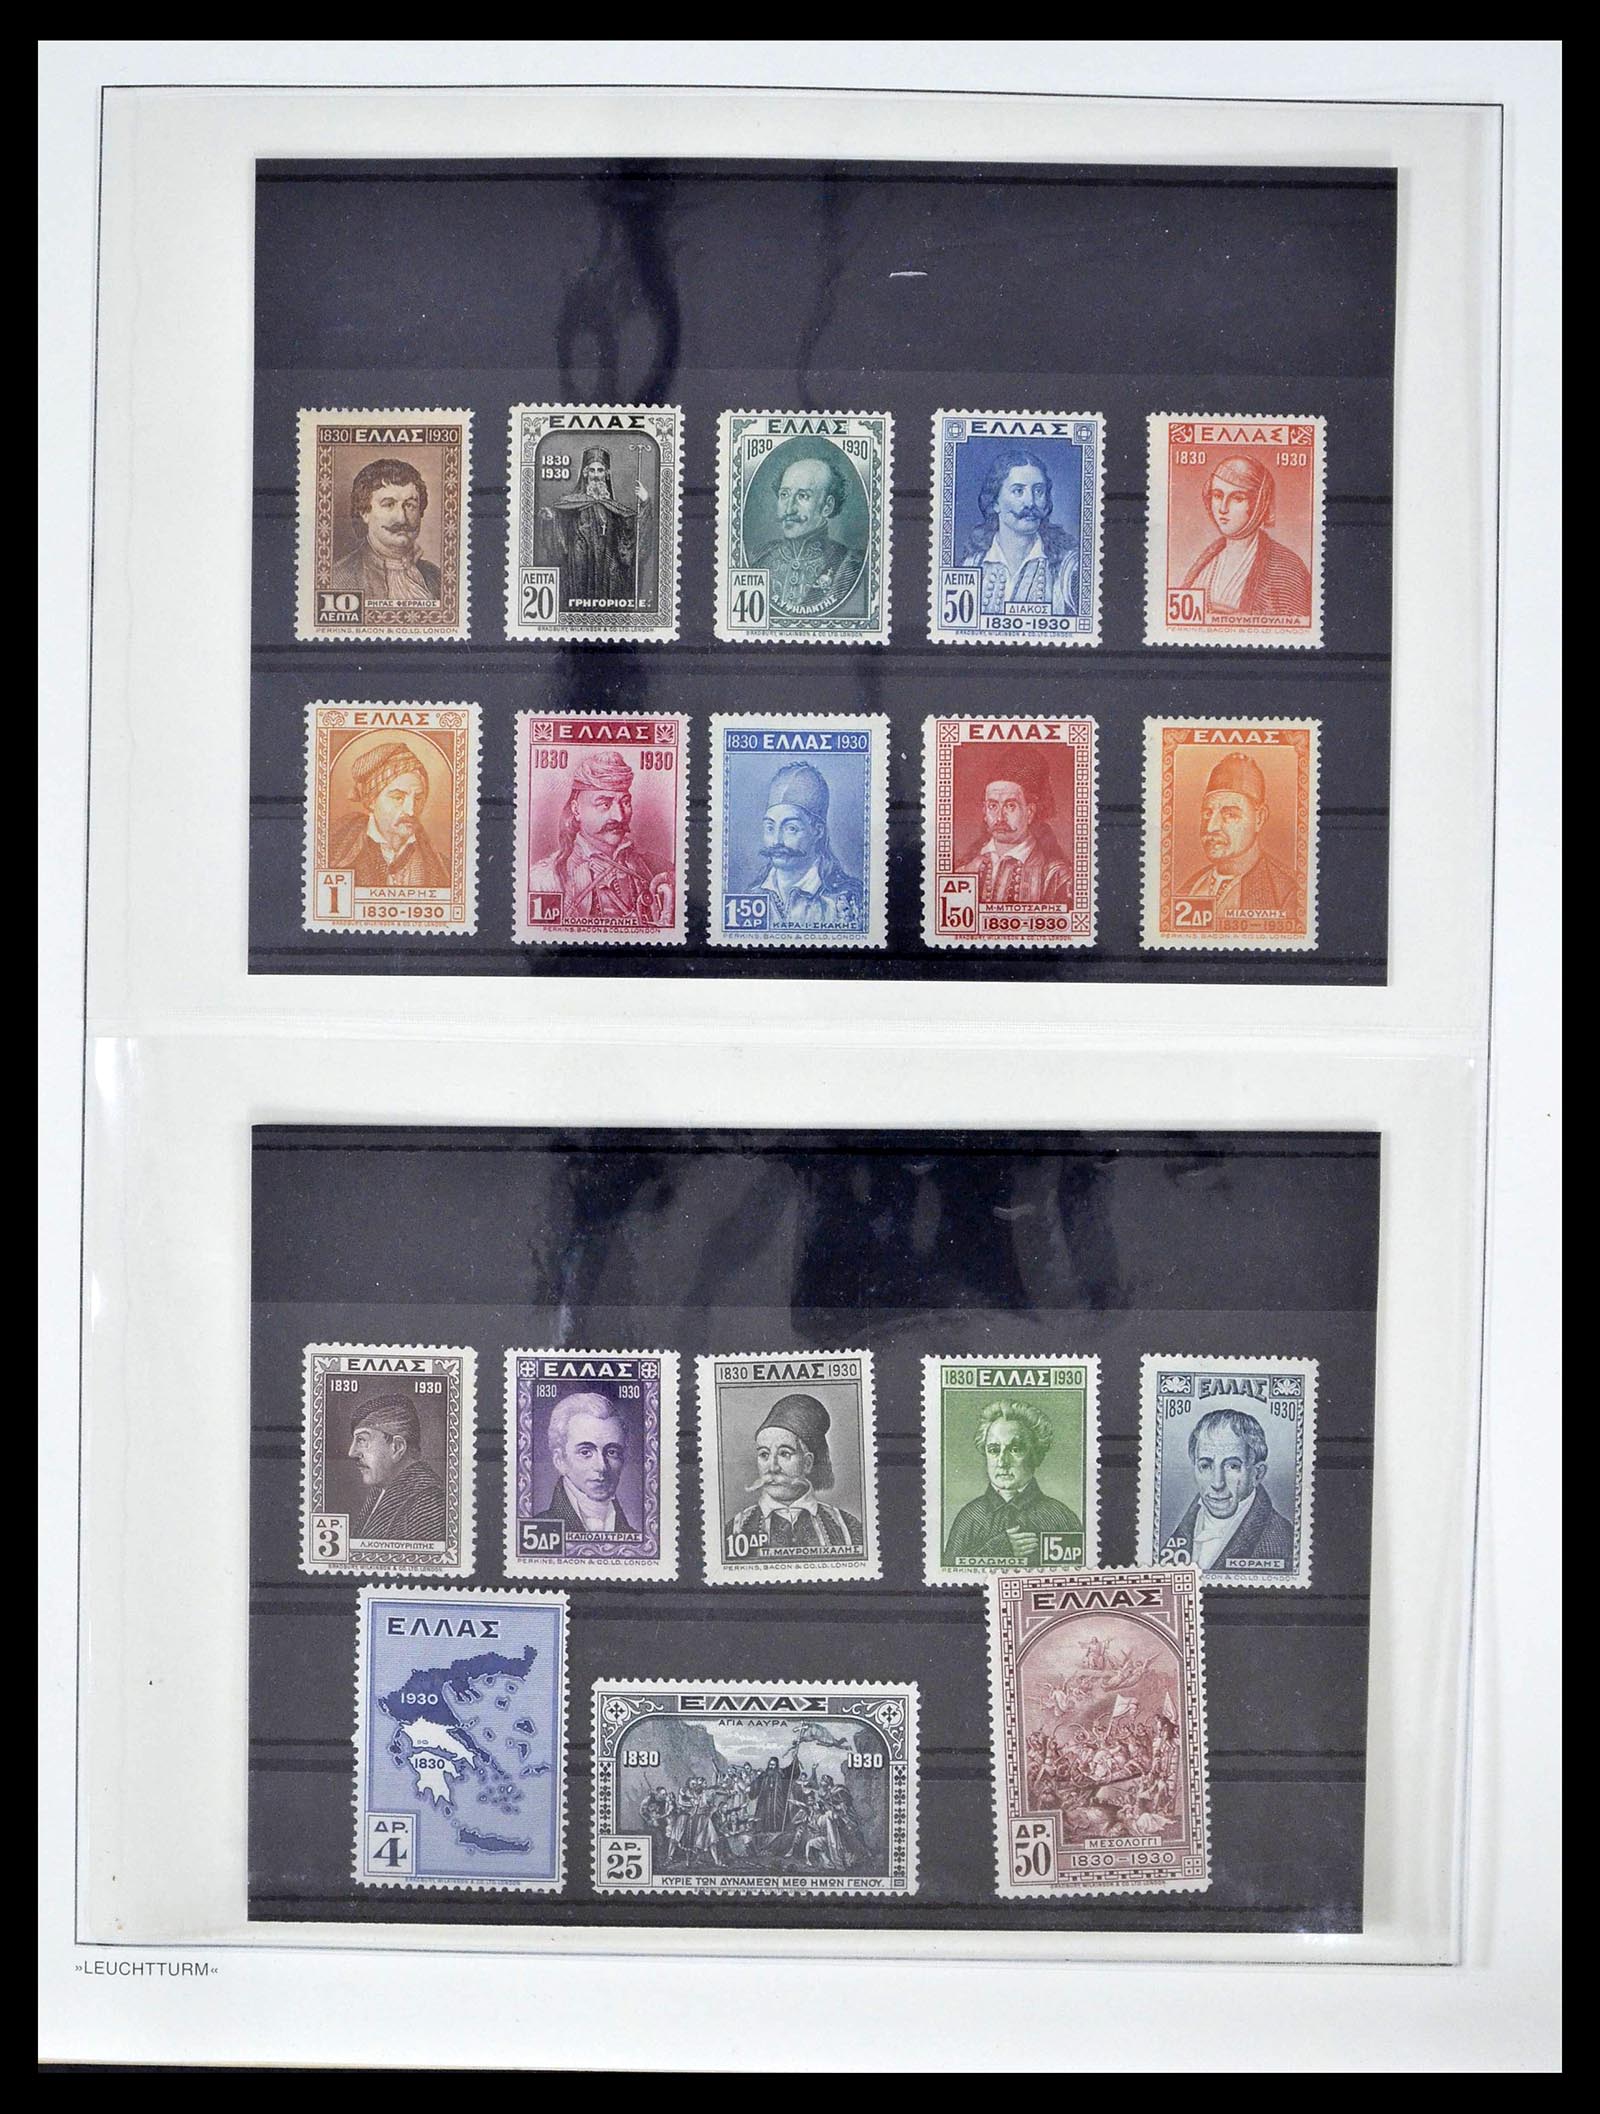 39156 0020 - Stamp collection 39156 Greece 1861-1996.